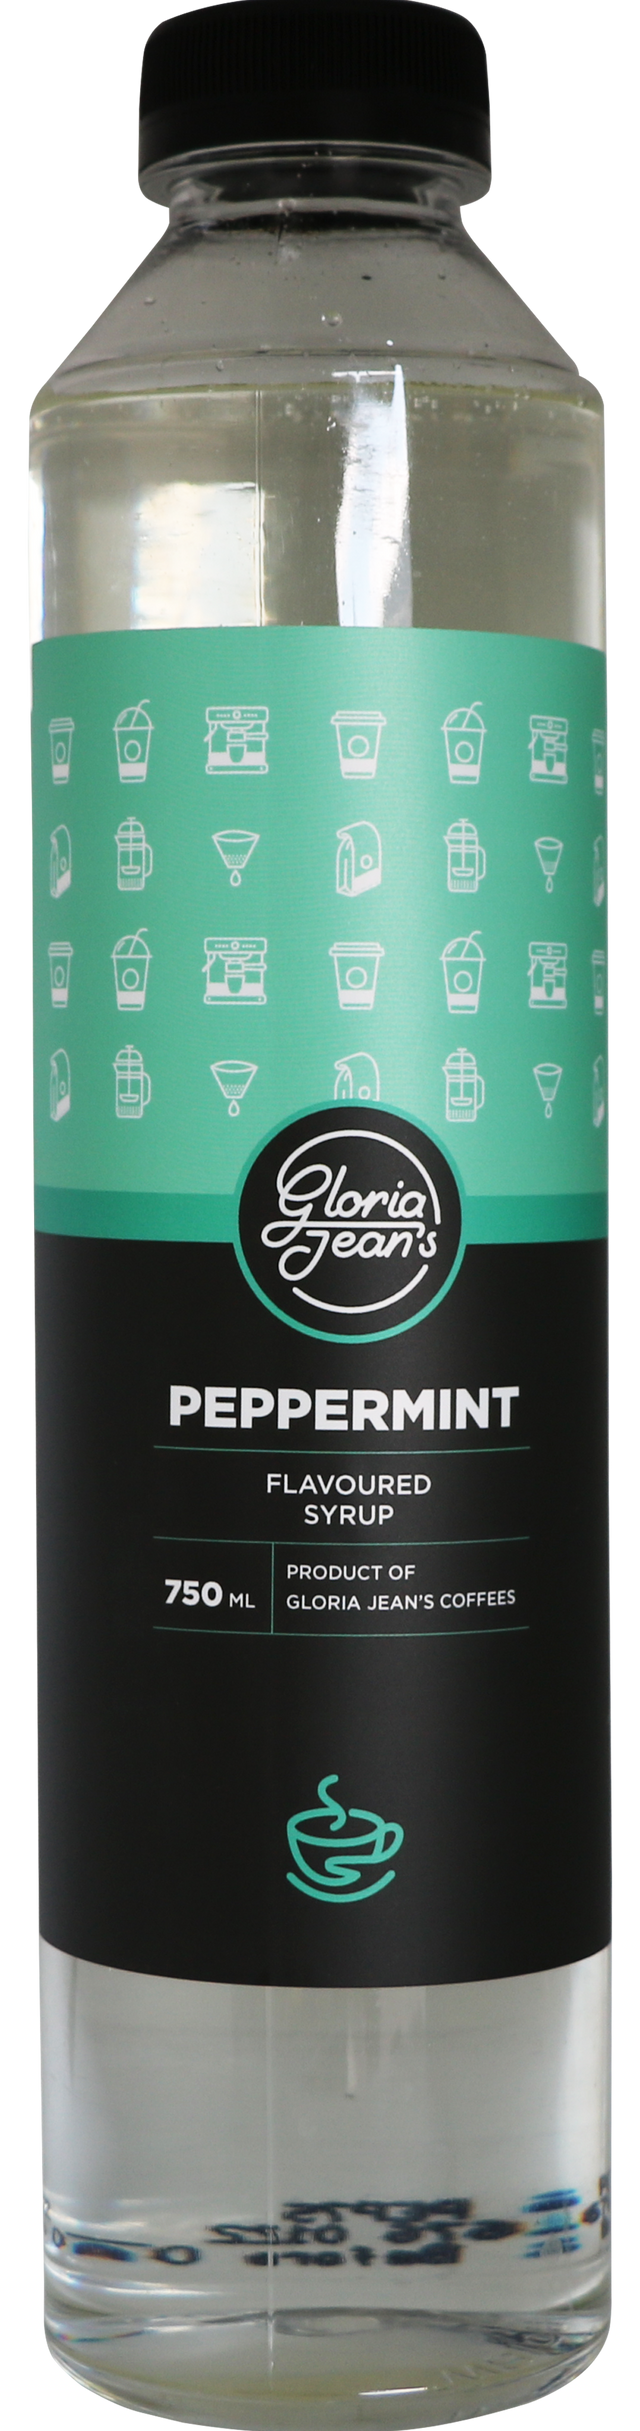 Gloria Jean's Peppermint Syrup - 750ml